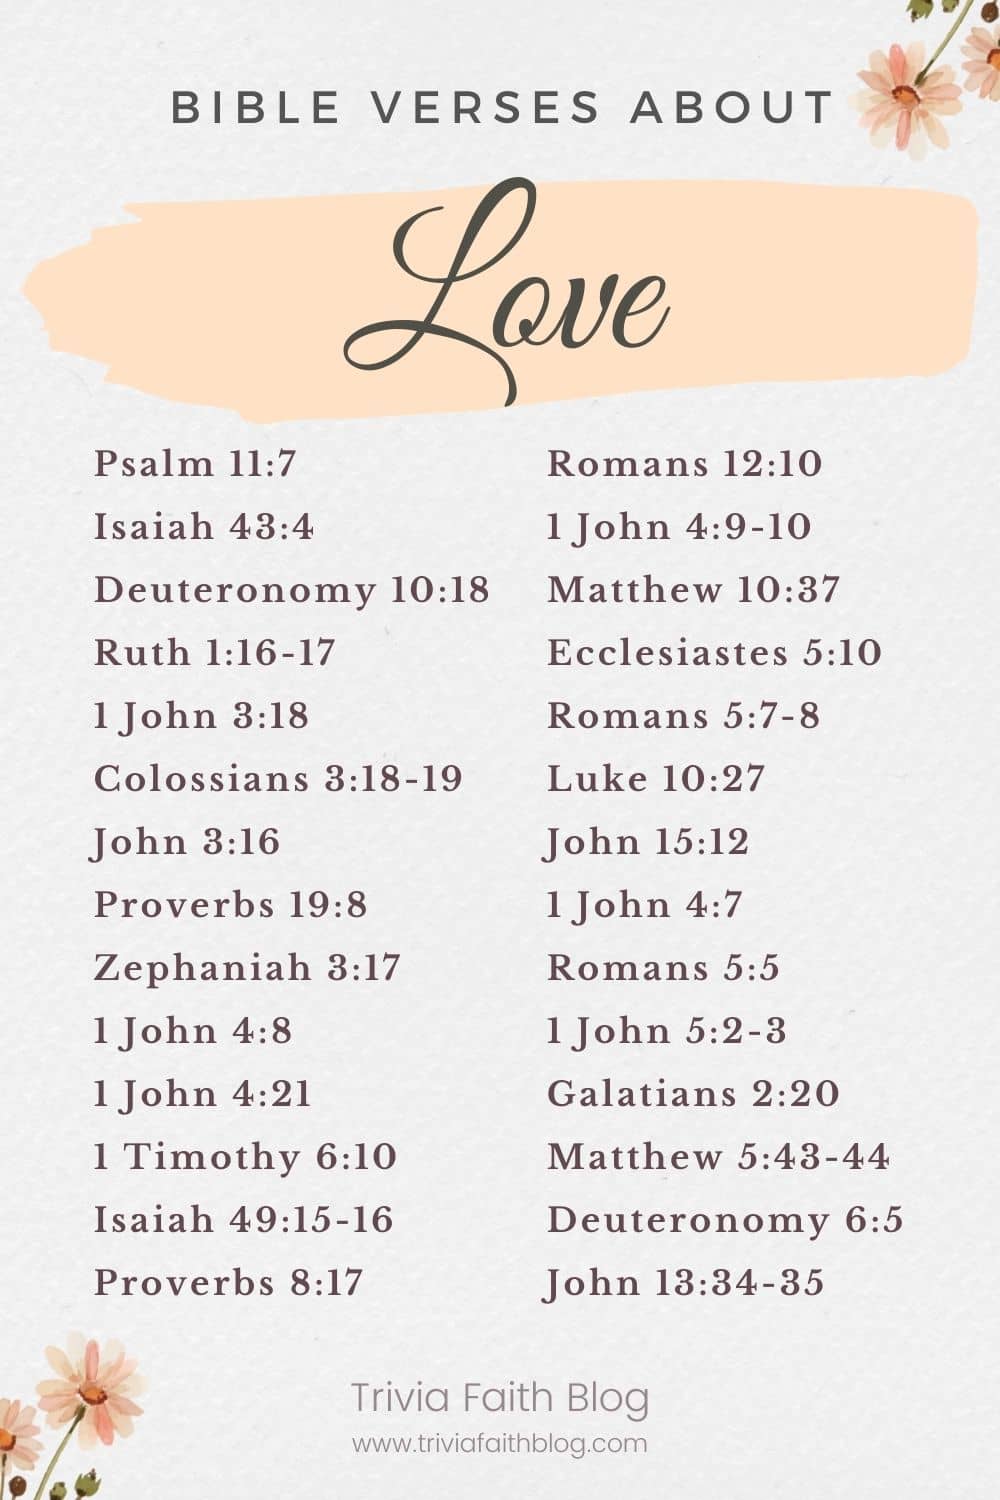 Bible verses about love of Christ